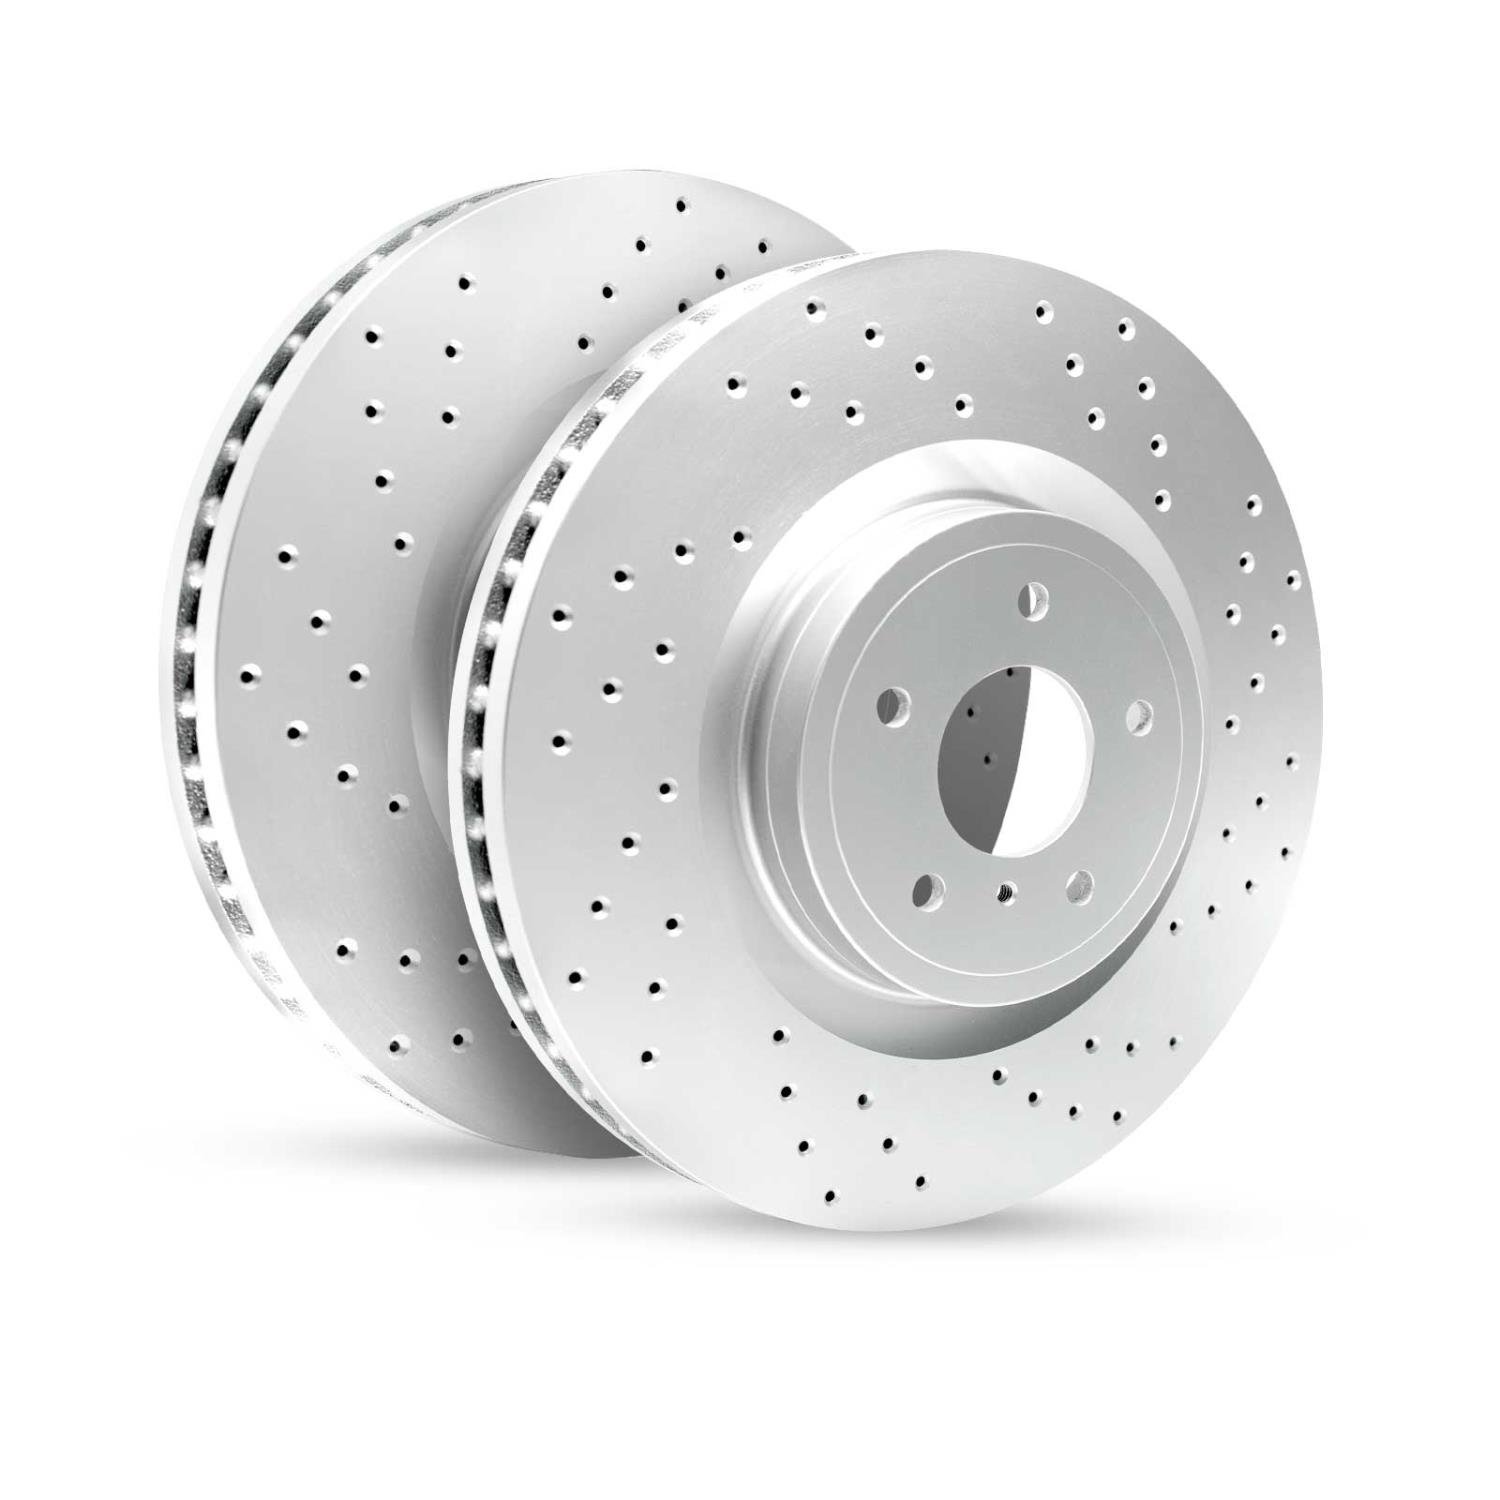 GEO-Carbon Drilled/Slotted Rotors, 2014-2020 Fits Multiple Makes/Models, Position: Rear